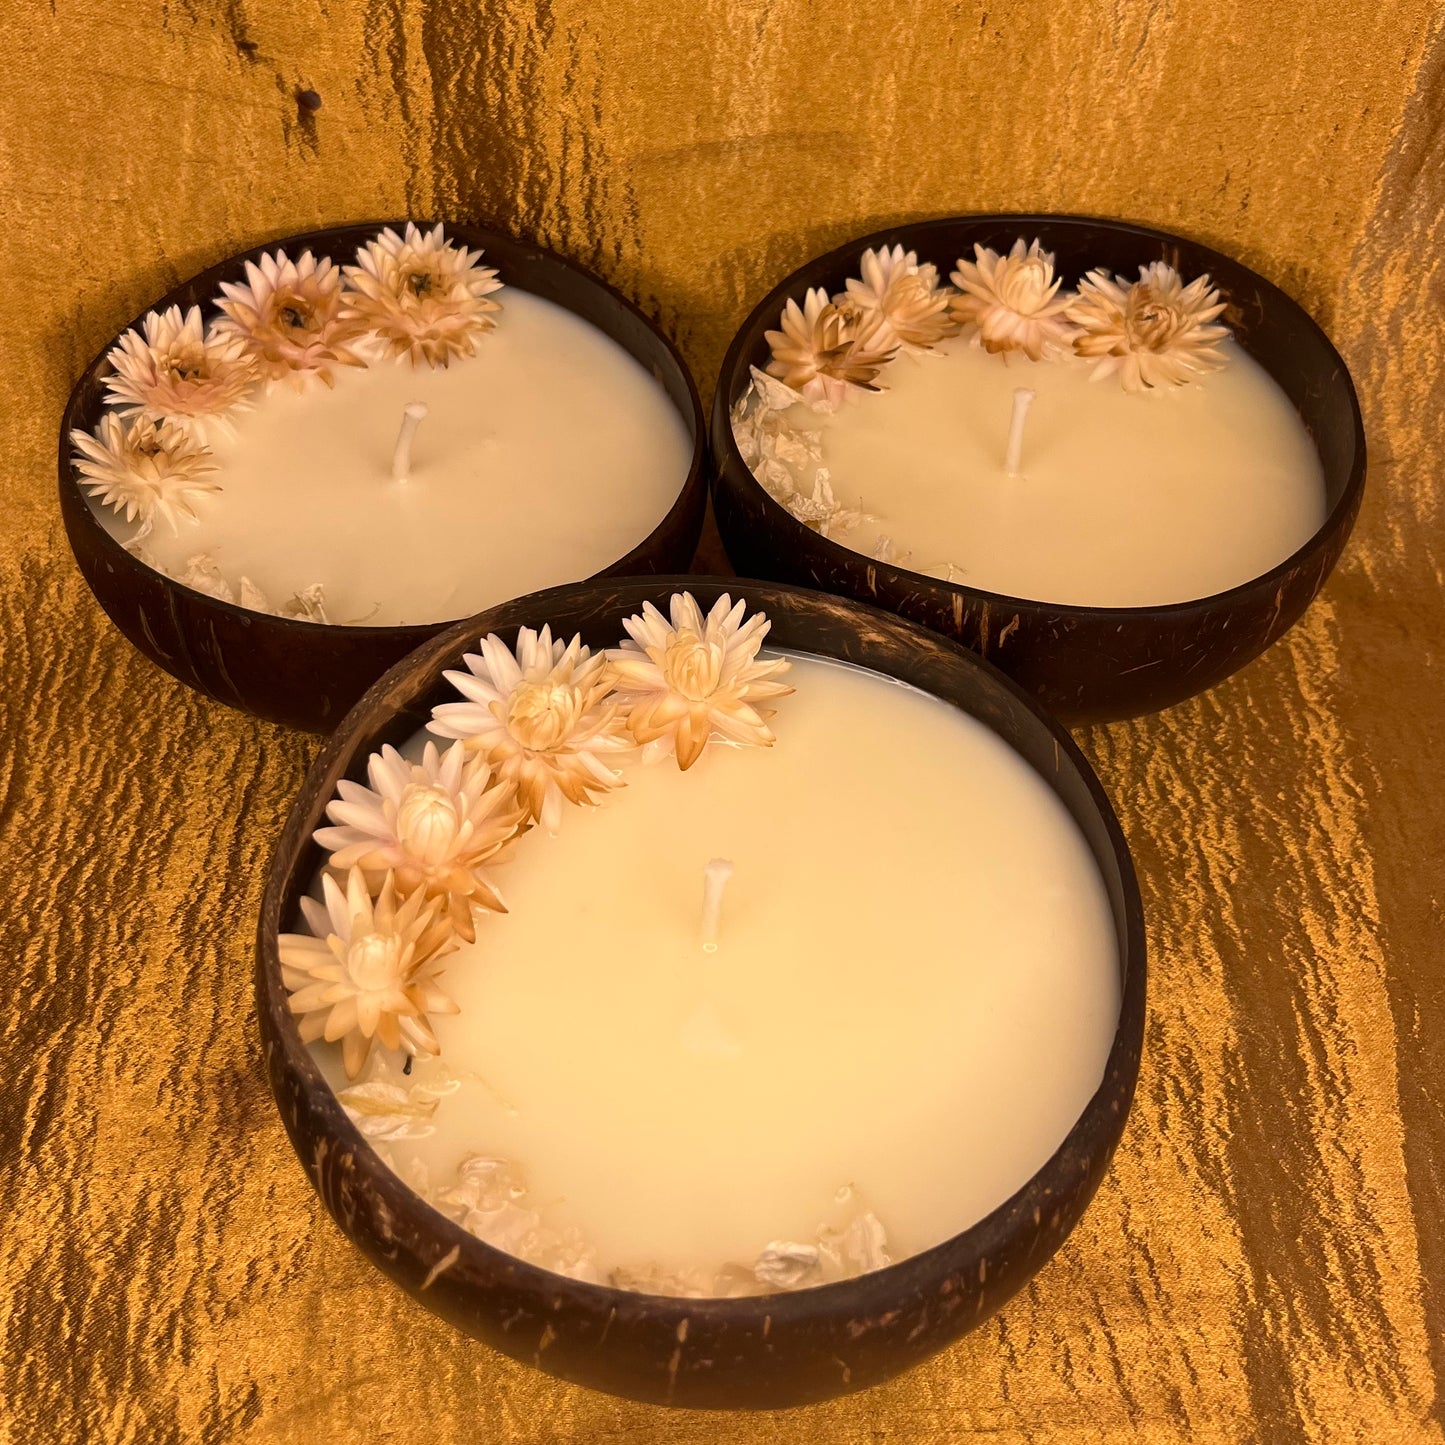 Floral Royalty Coconut Candle